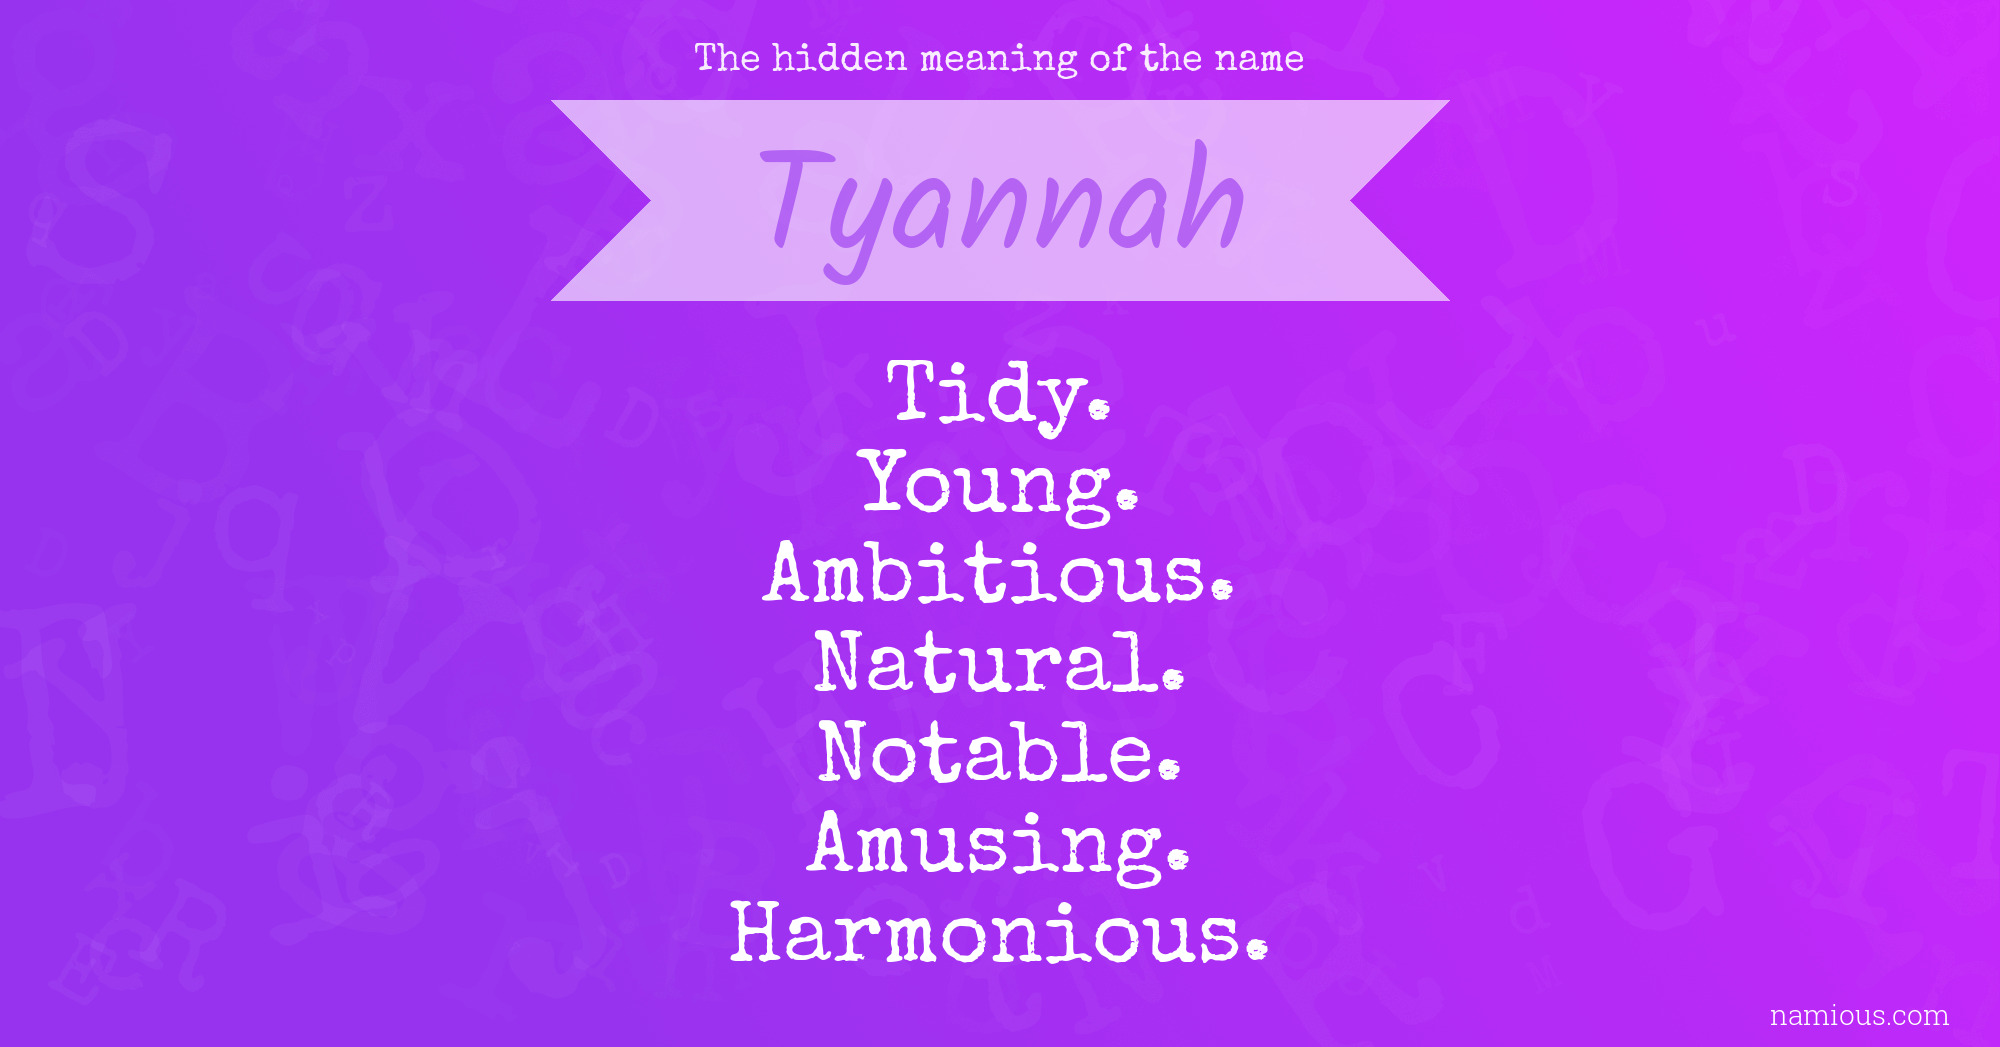 The hidden meaning of the name Tyannah